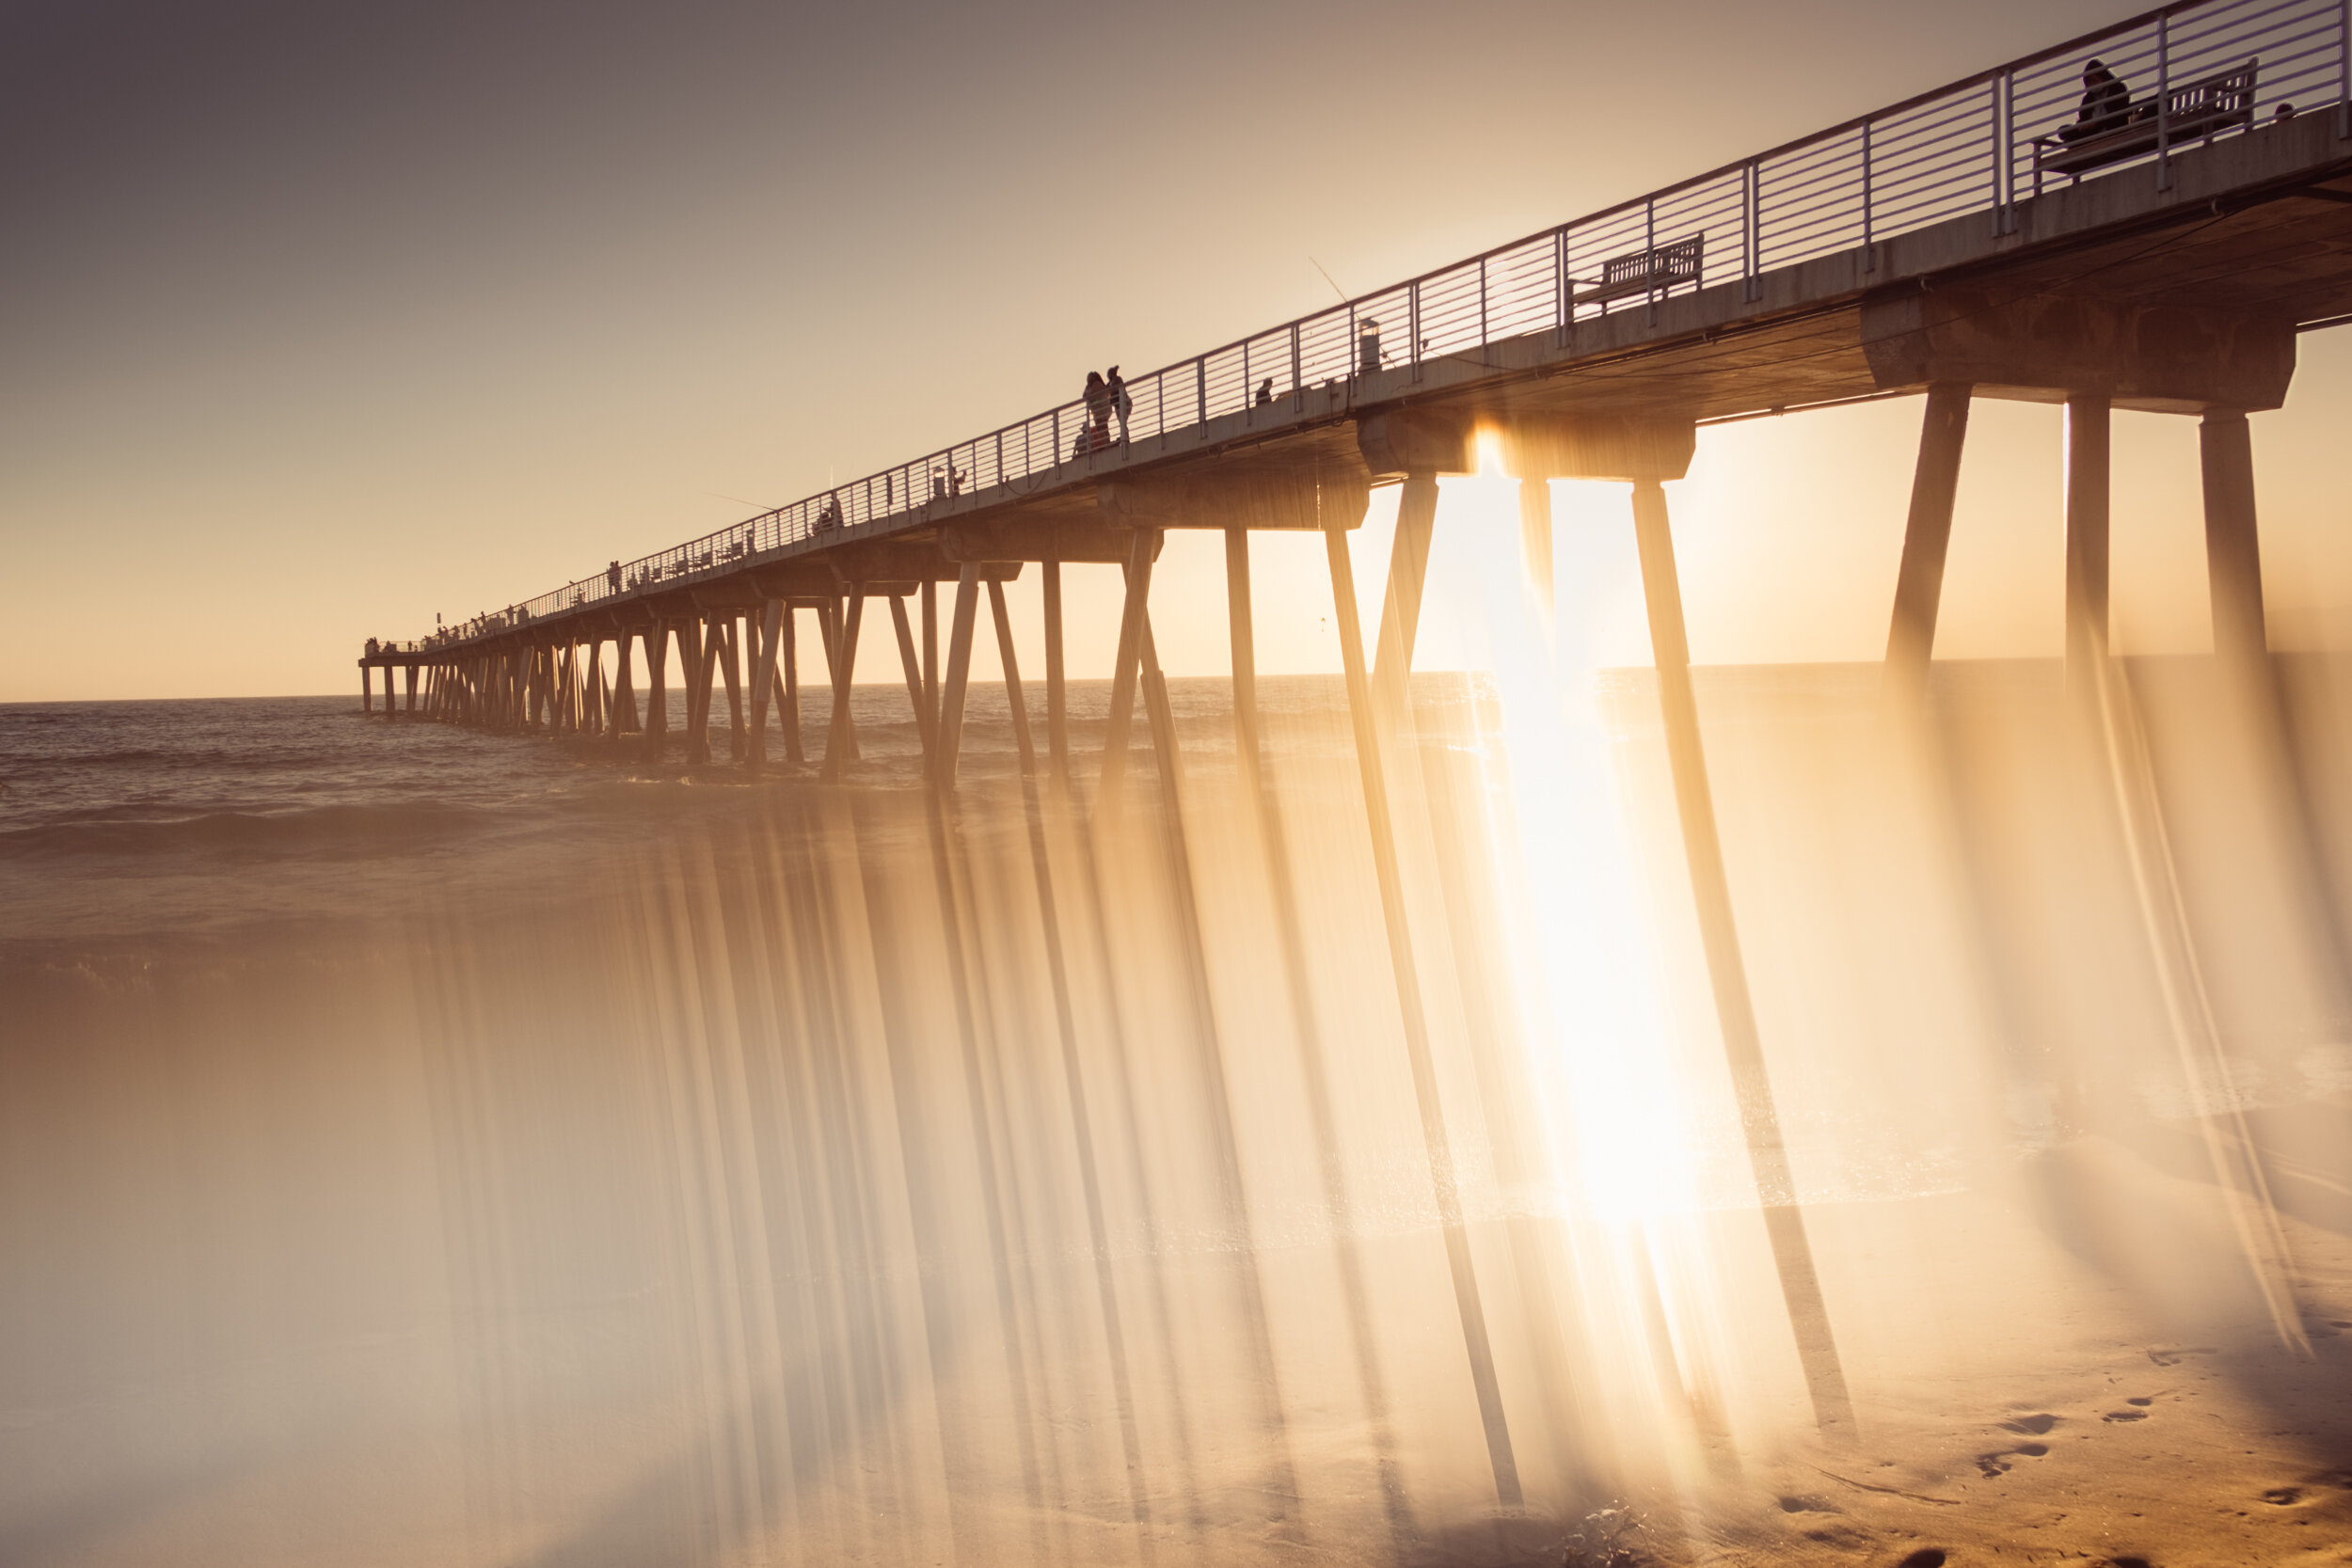 https://images.squarespace-cdn.com/content/v1/56270bbbe4b01fbf93c69fcd/1594782229554-QISYYD95D4090EMZ9WO0/Hermosa-Beach-Pier-with-Saber-OMNI-Lensbaby-effect-by-UteReckhorn-1.jpg